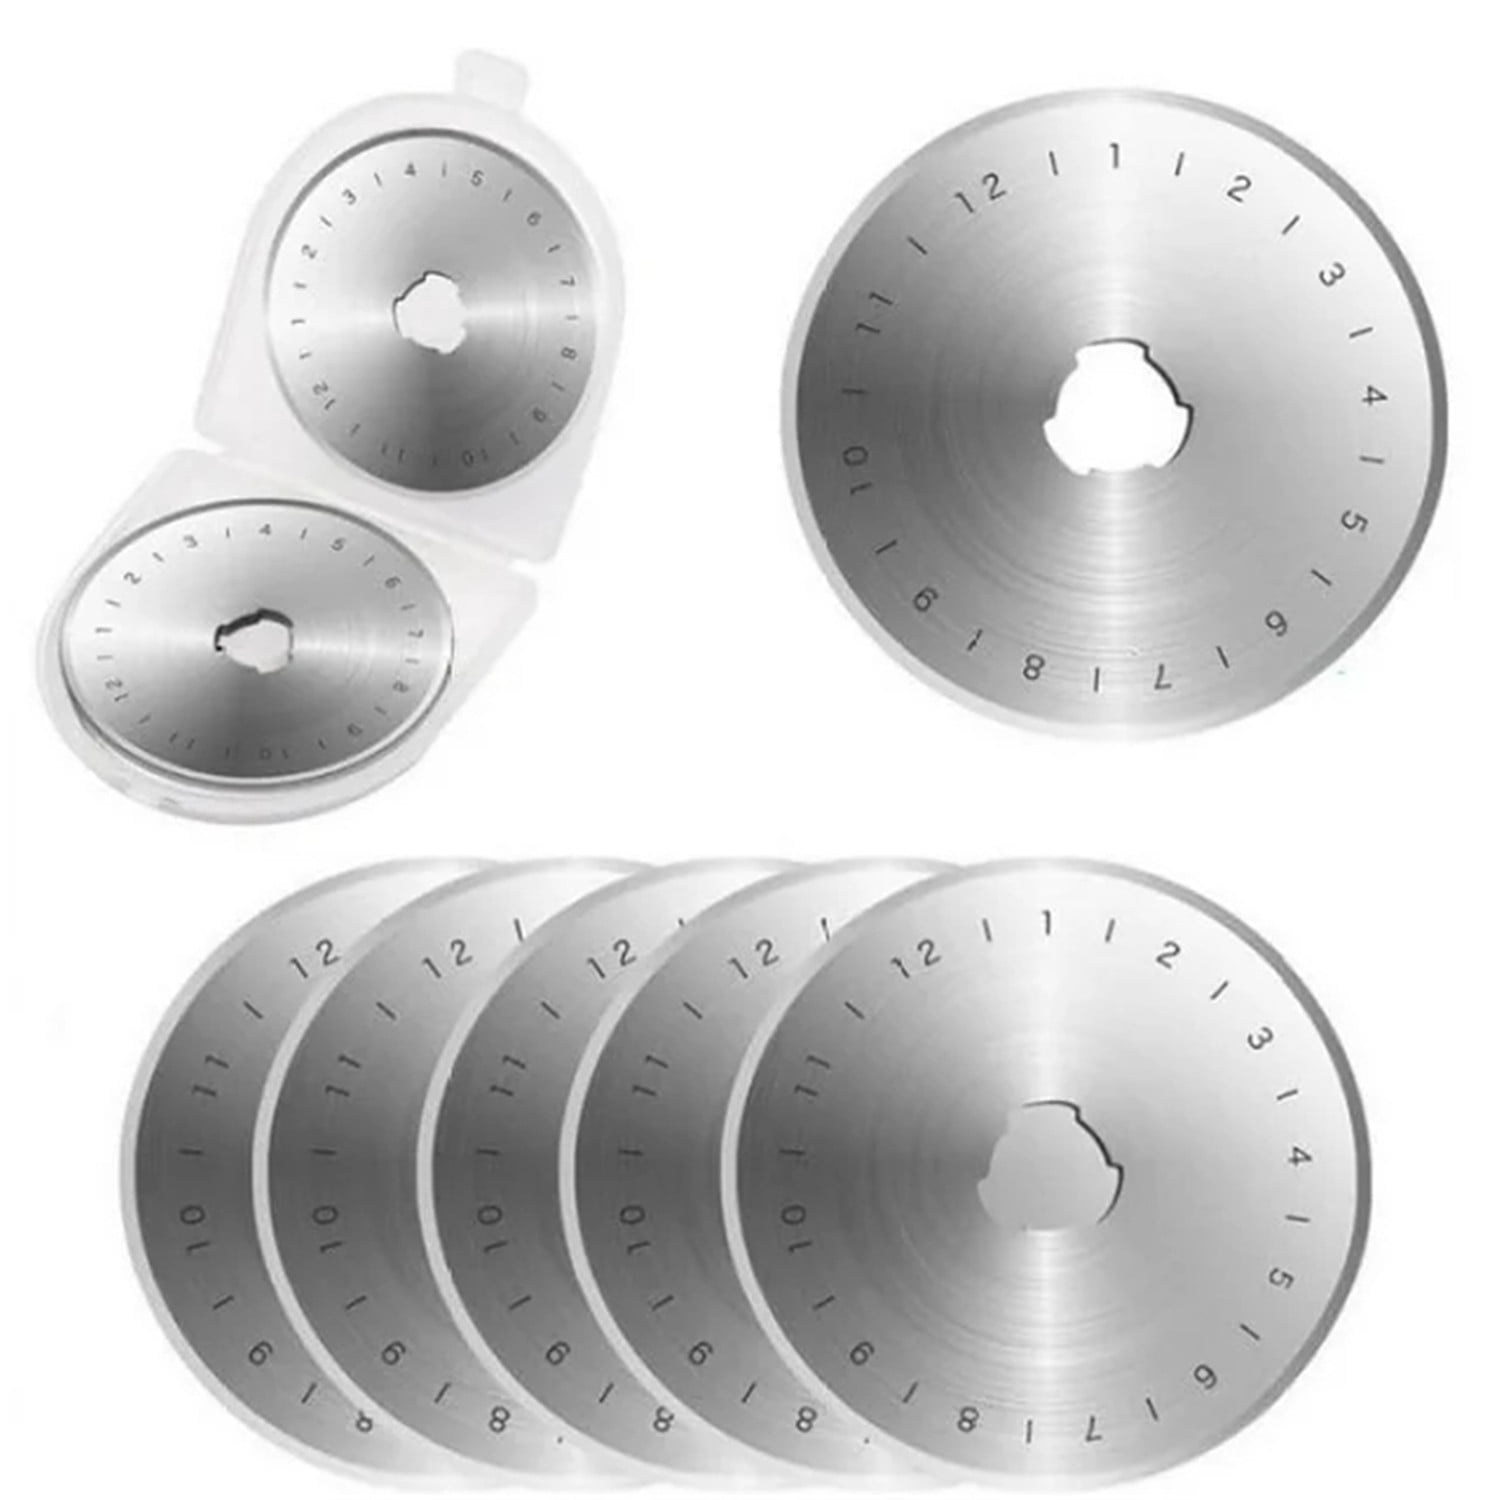 45mm Rotary Cutter Blades 10 Pack Rotary Blades Sharp and Durable